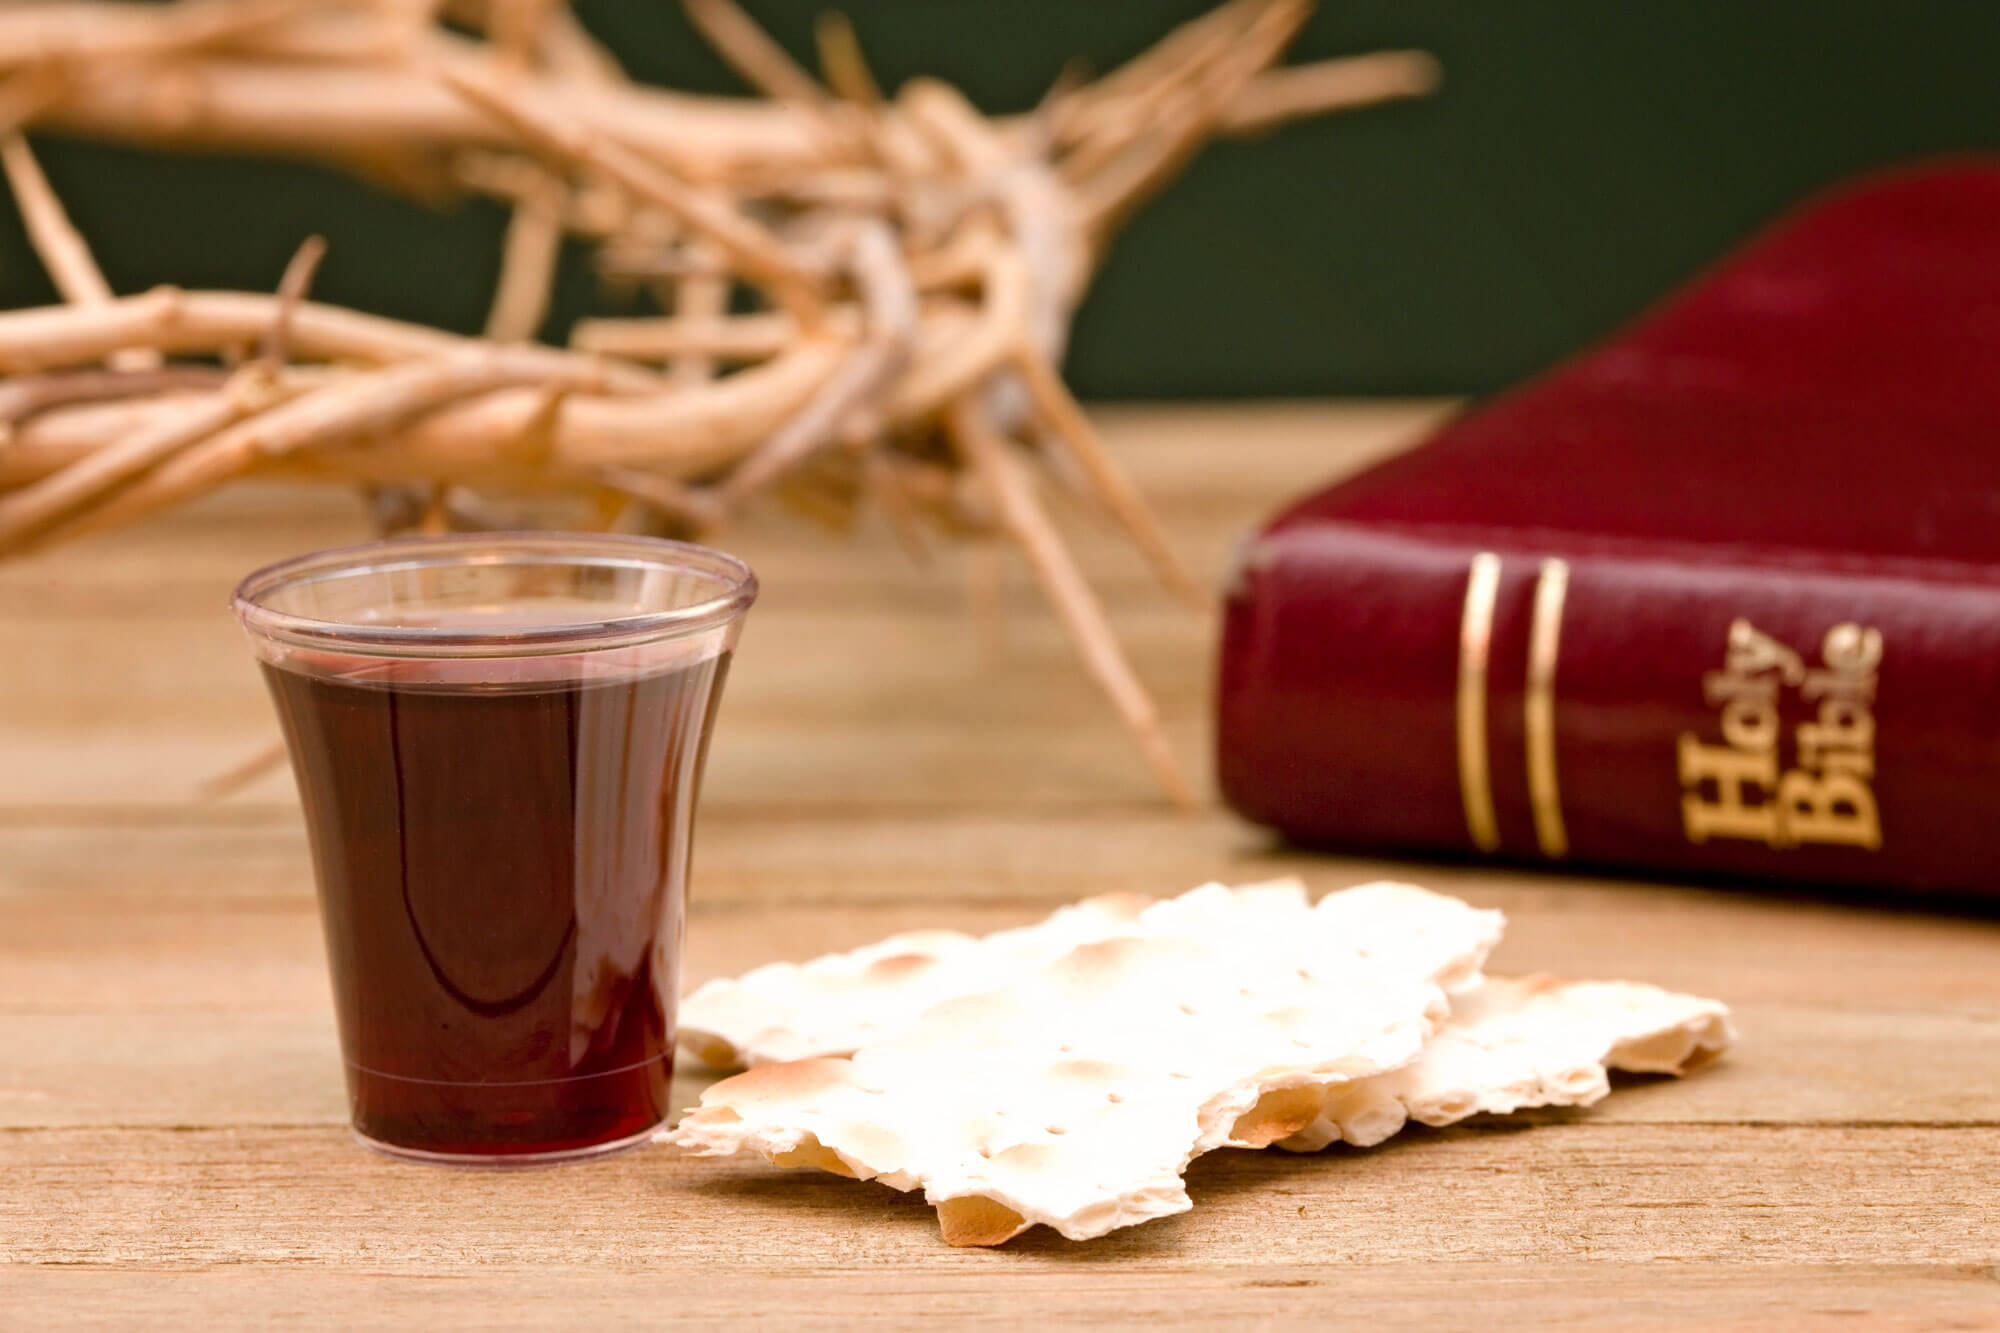 The Passover and Jesus